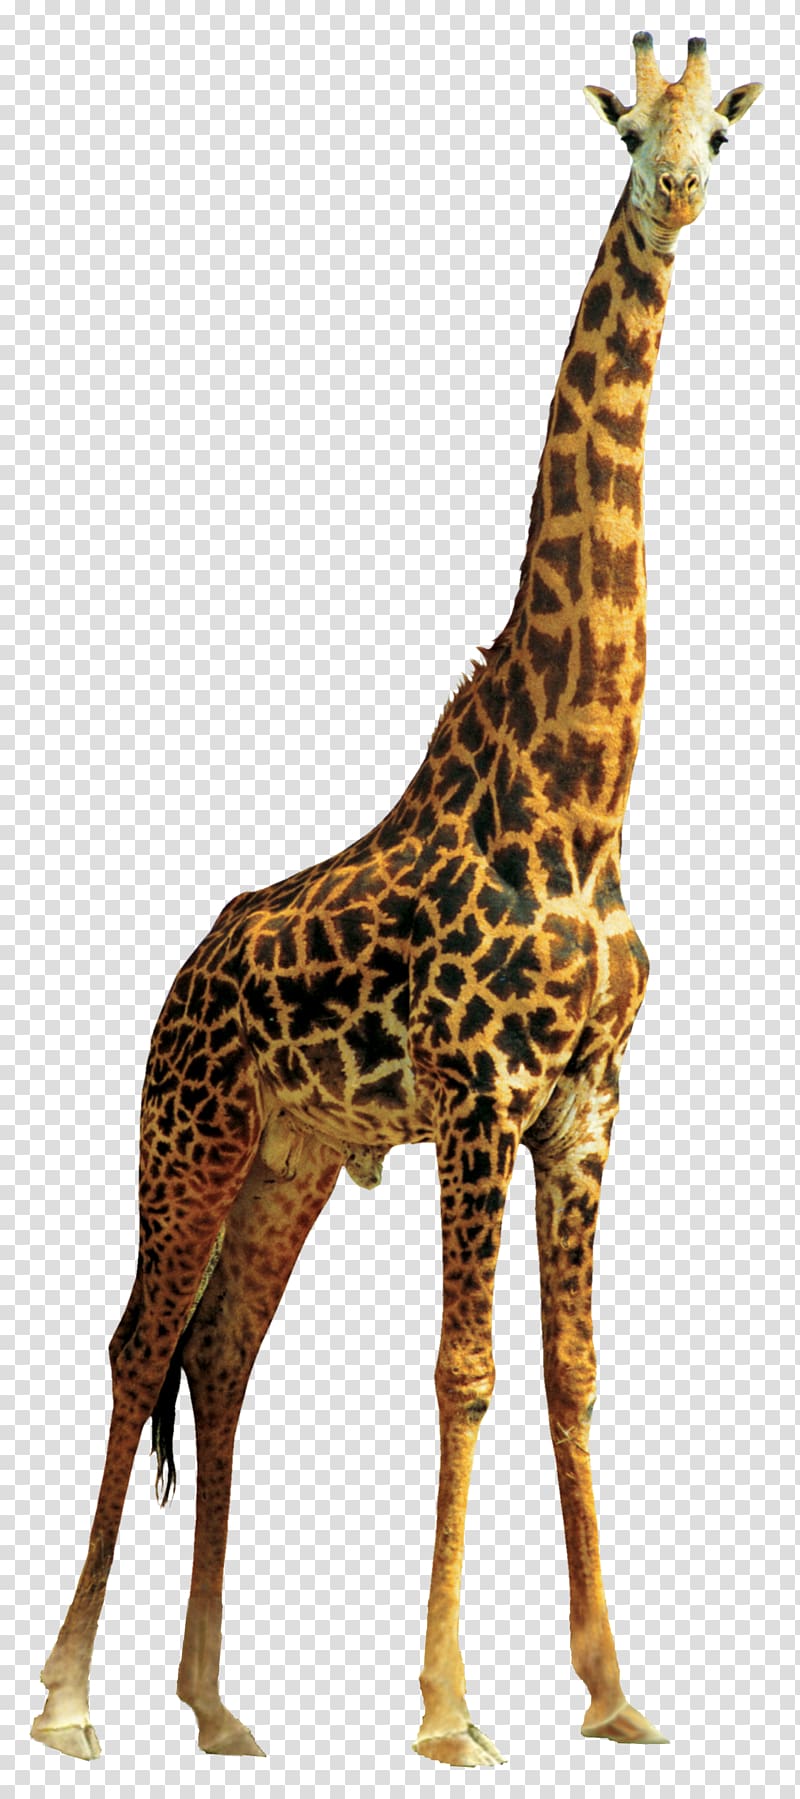 Northern giraffe Transparency and translucency Animal, giraffe transparent background PNG clipart